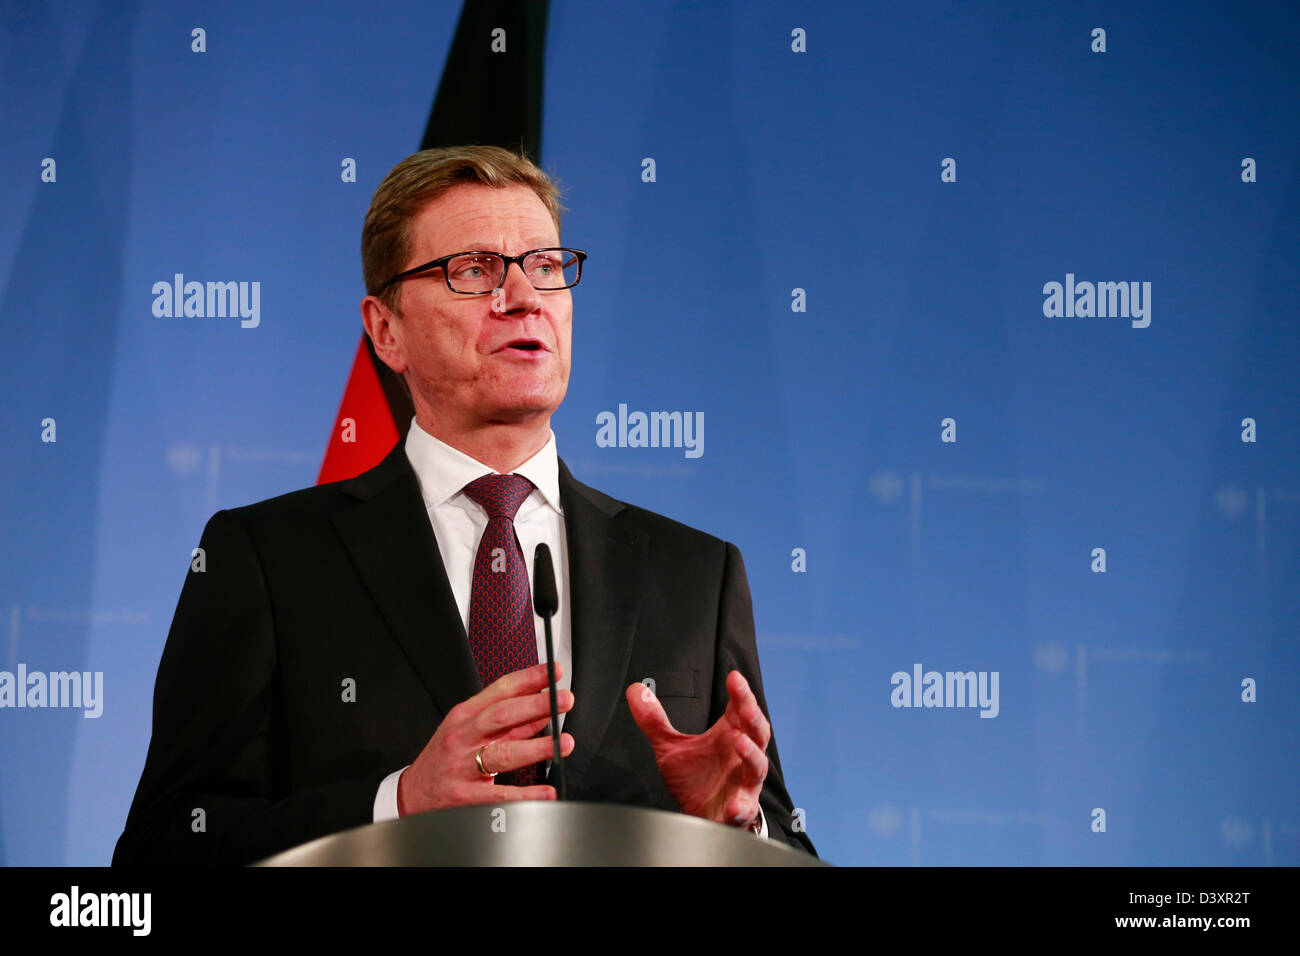 Berlin, Germany.  26 February 2013. Press statements after the meeting between the U.S. Secretary of state John Kerry and the German Foreign Minister Guido Westerwelle in Berlin. On Picture: Guido Westerwelle, German Foreign Minister. Credit:  Reynaldo Chaib Paganelli / Alamy Live News Stock Photo